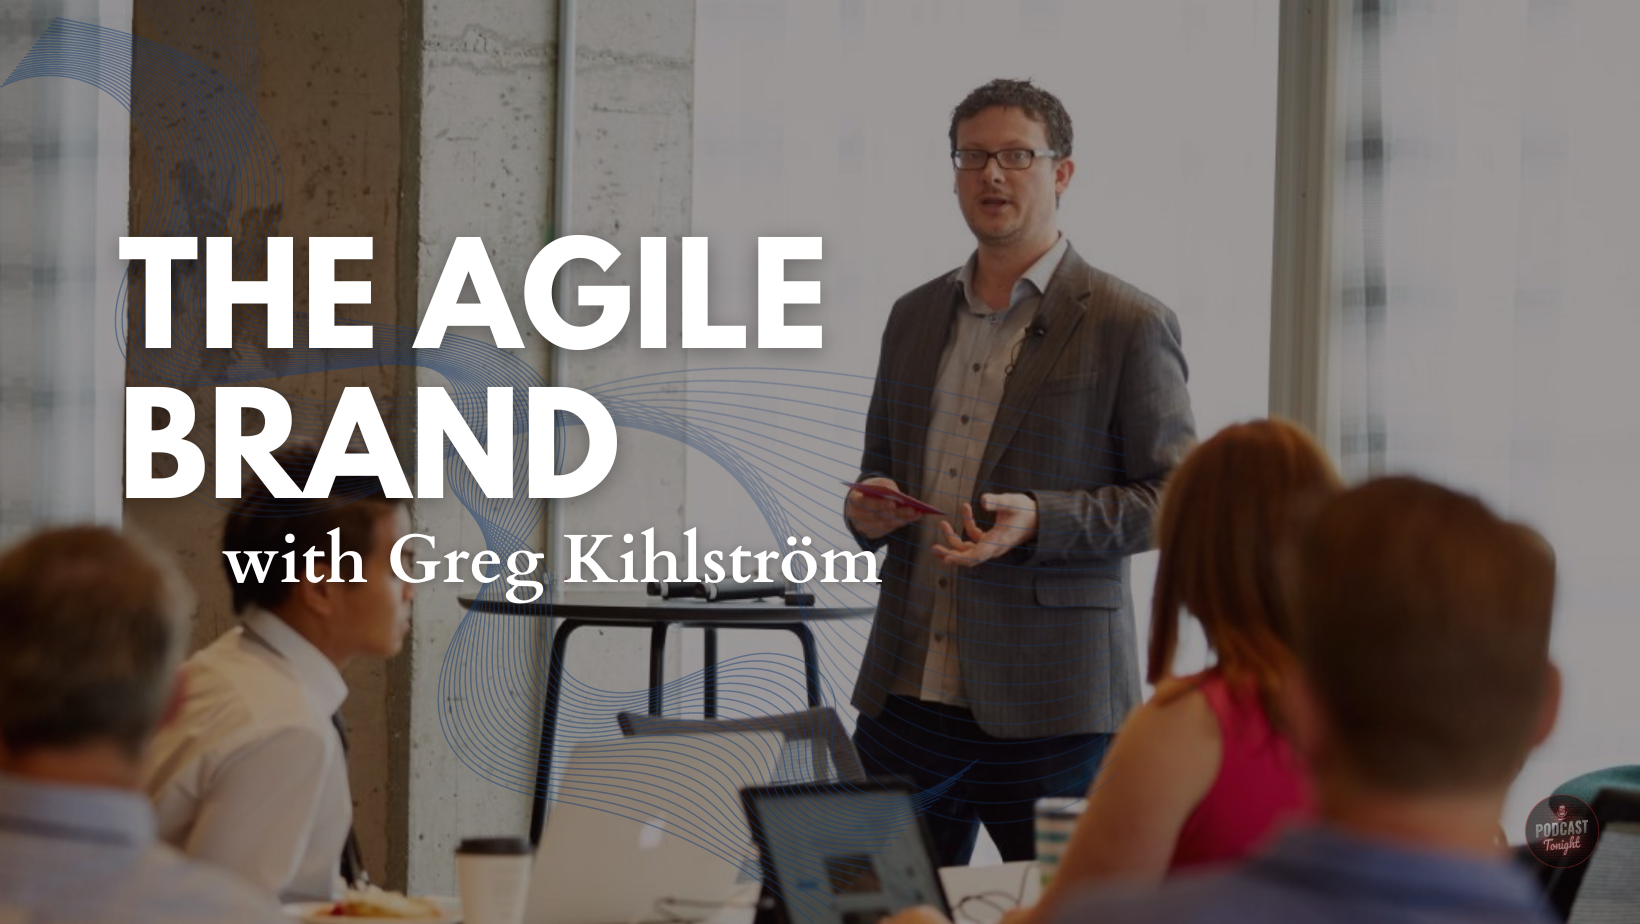 Why Listen To The Agile Brand Podcast